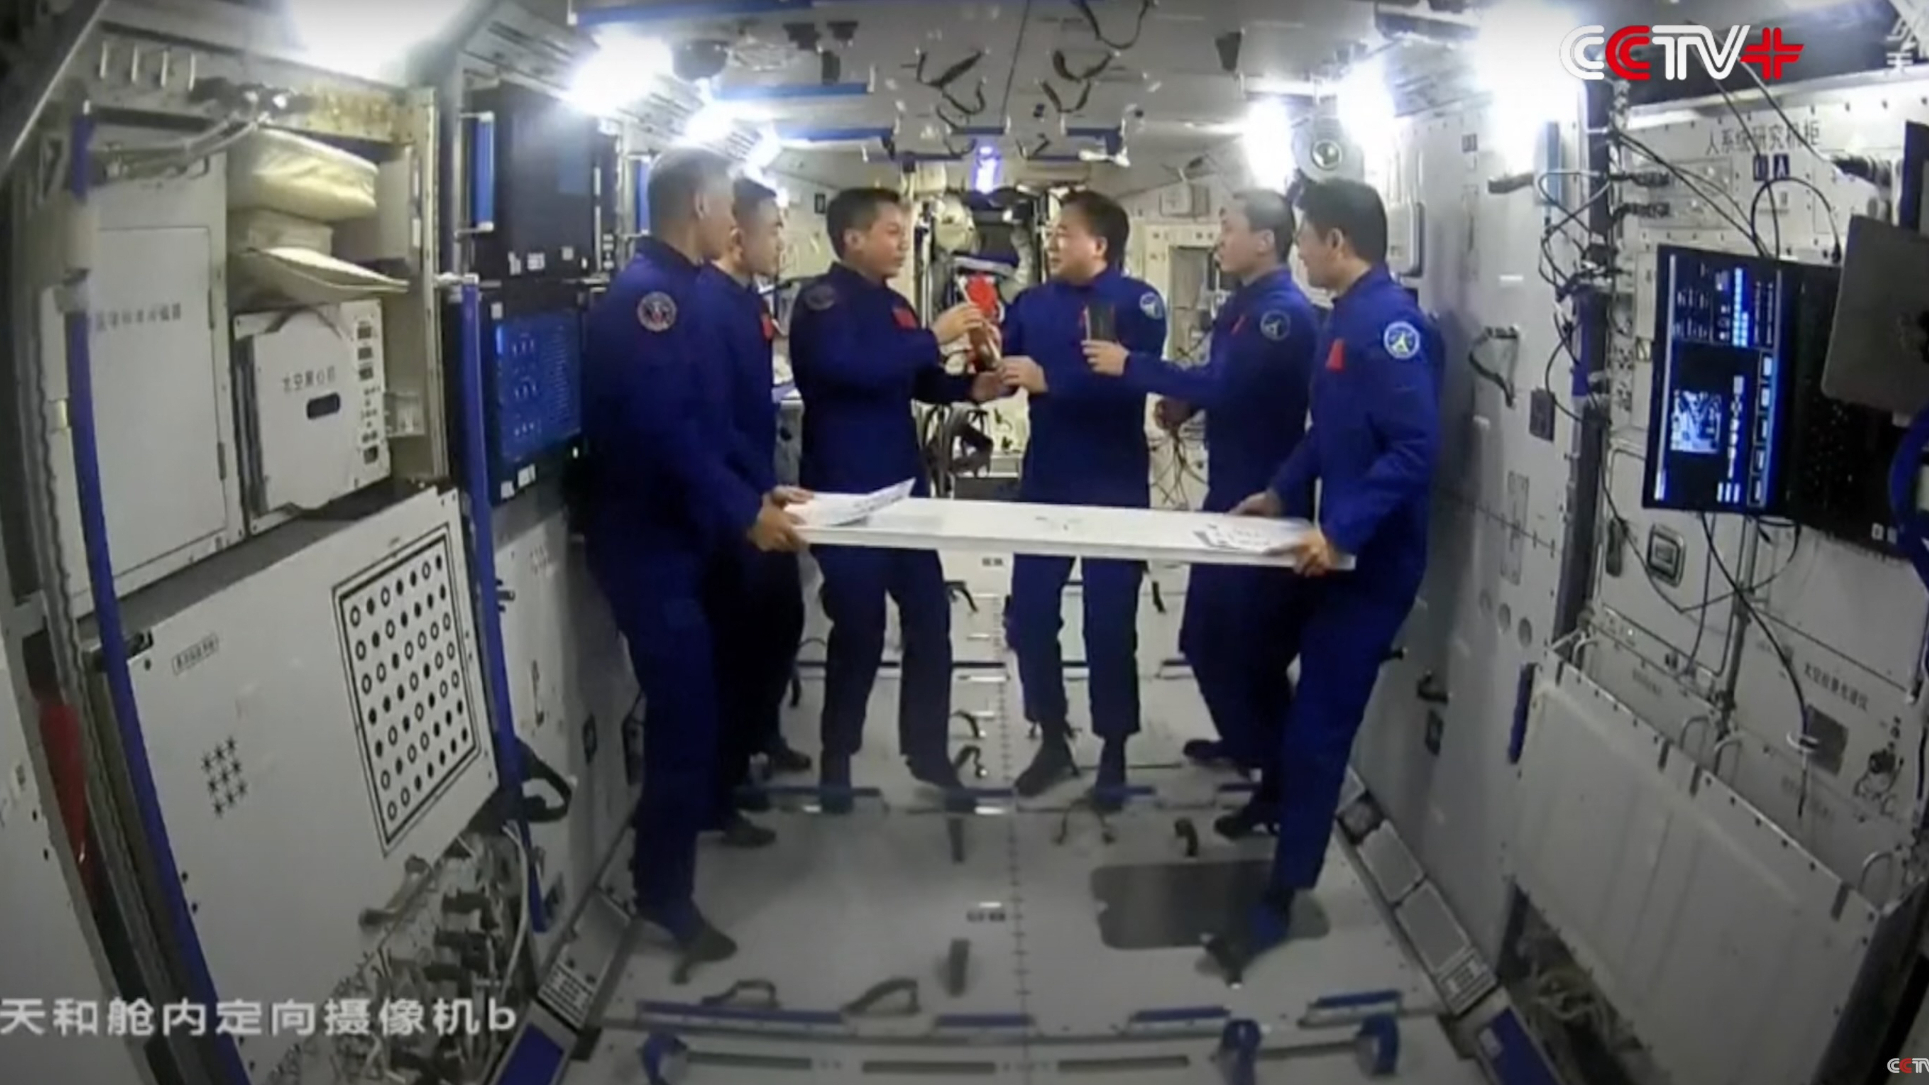 Breaking News six astronauts in blue flight suits circulation aboard a local residing with white partitions.